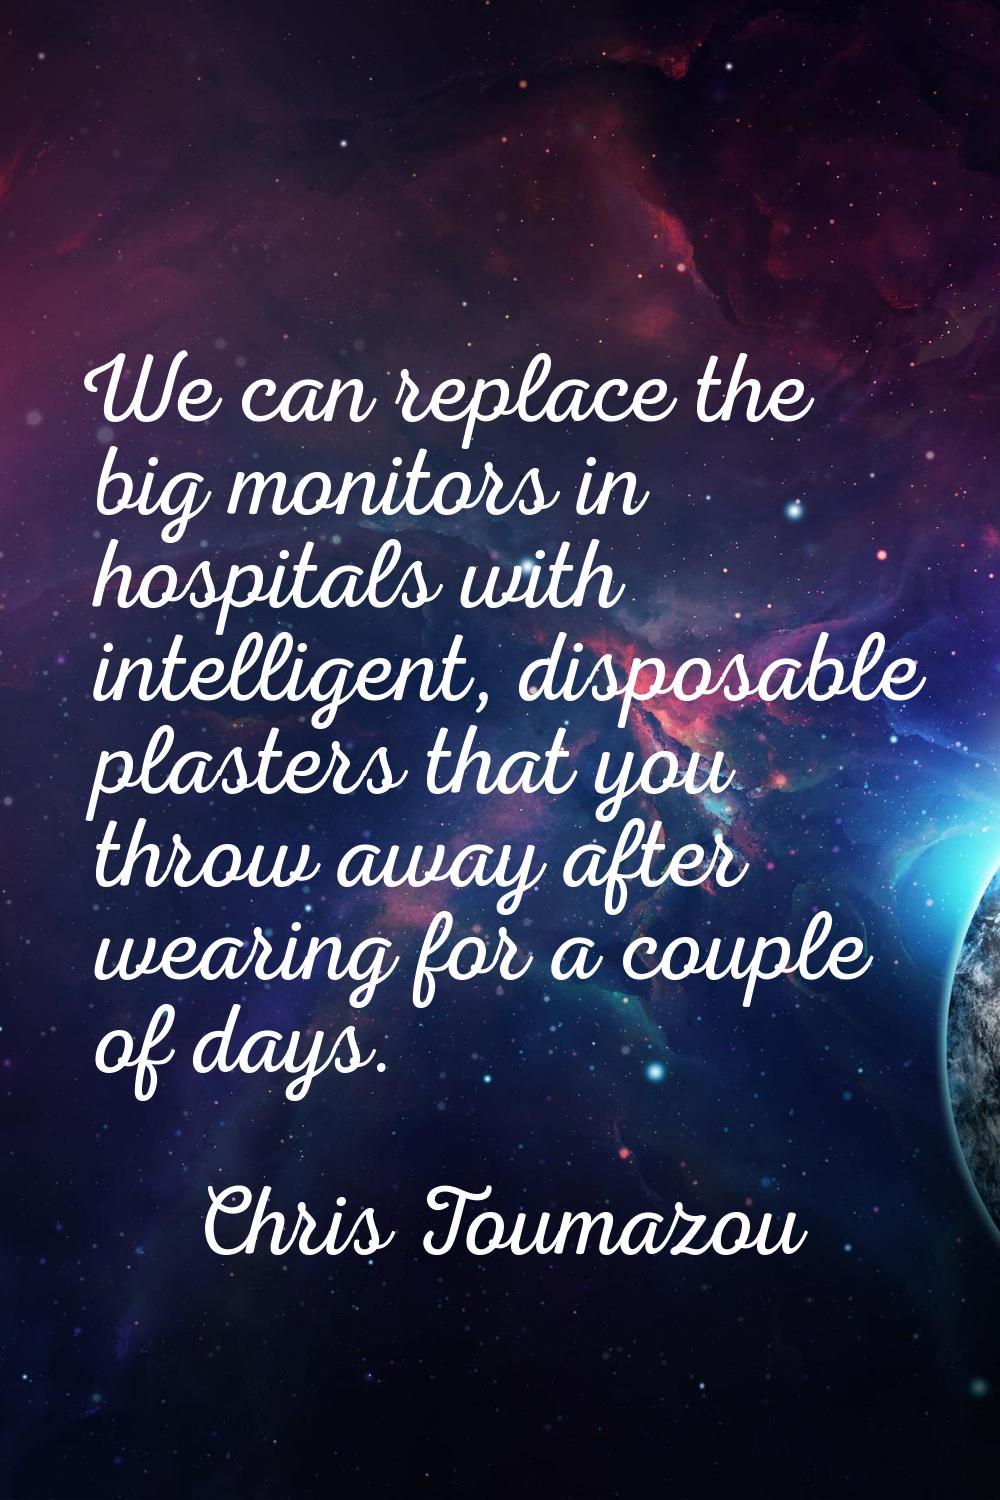 We can replace the big monitors in hospitals with intelligent, disposable plasters that you throw a